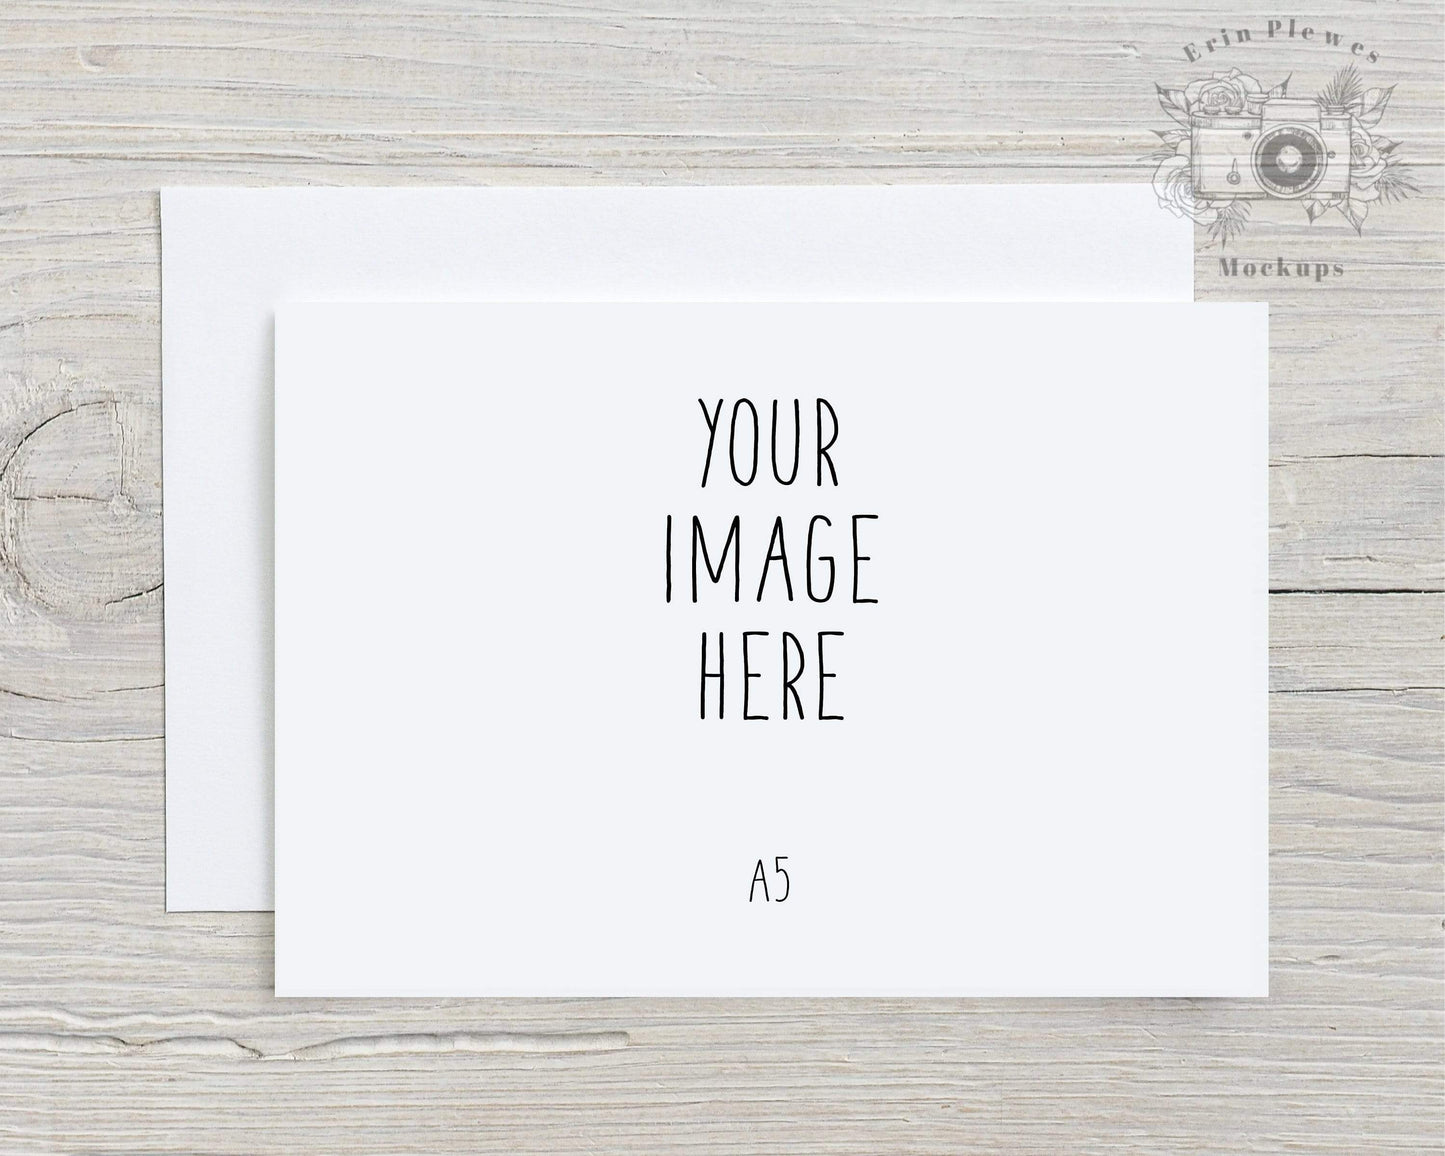 Erin Plewes Mockups A5 Greeting card mockup, Thank you card mock-up with white envelope for rustic wedding and lifestyle photo, Jpeg Instant Digital Download